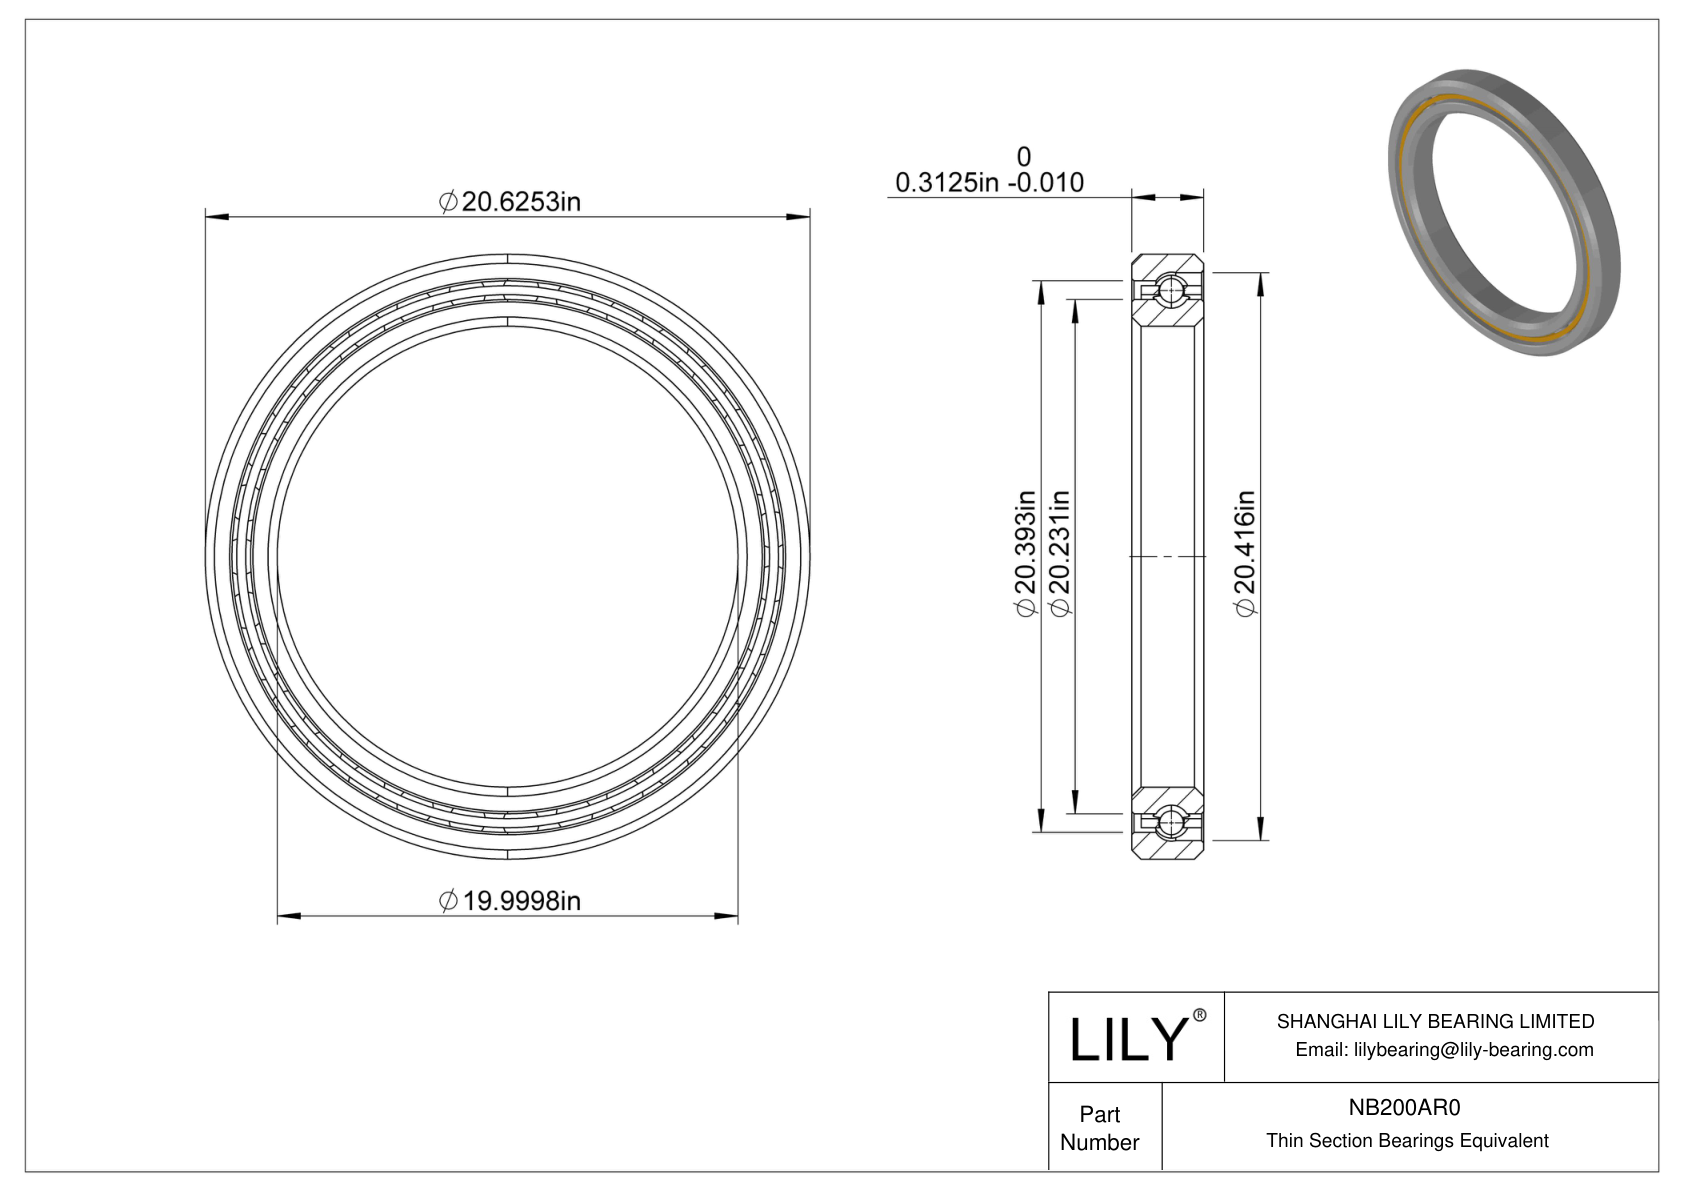 NB200AR0 Constant Section (CS) Bearings cad drawing